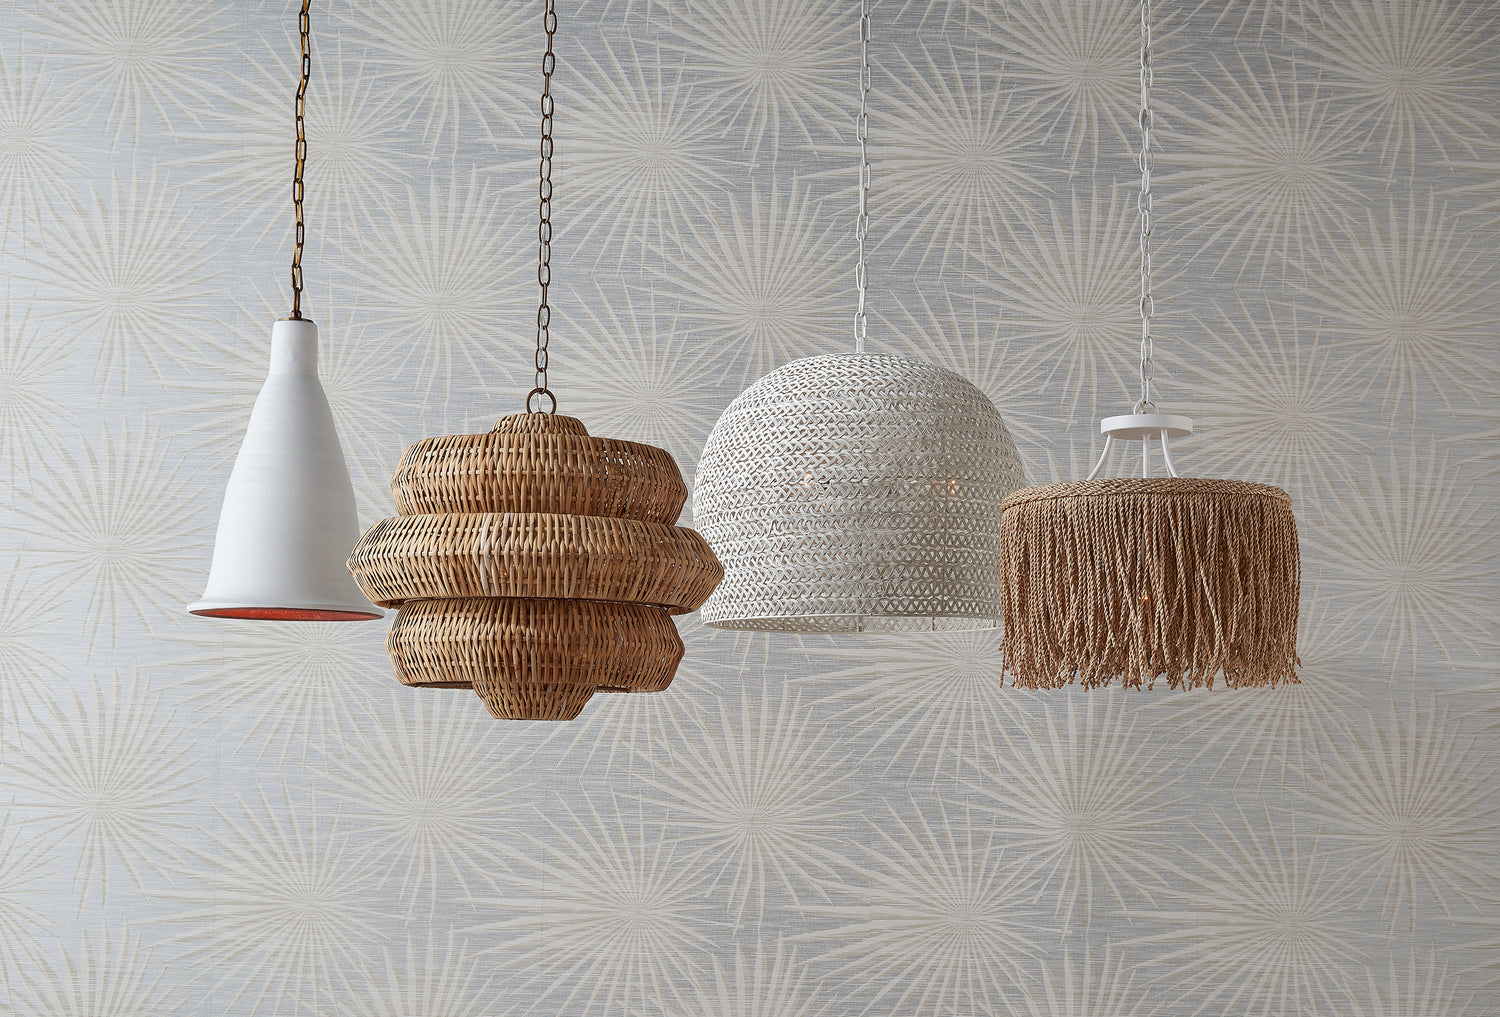 Three Light Chandelier from the Antibes collection in Khaki/Natural Rattan finish